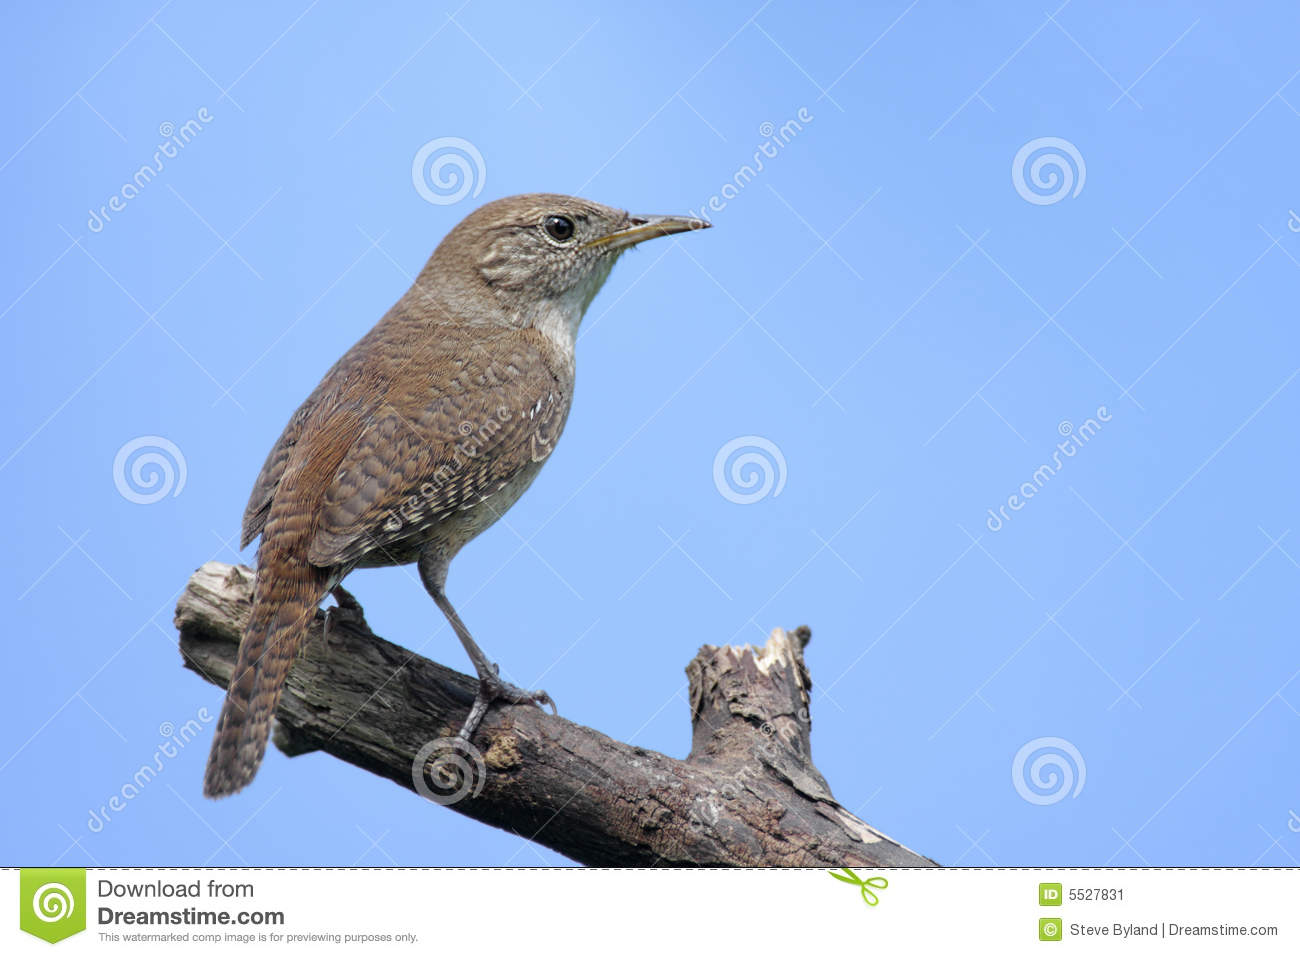 House Wren  Troglodytes Aedon  On A Perch With A Blue Sky Background